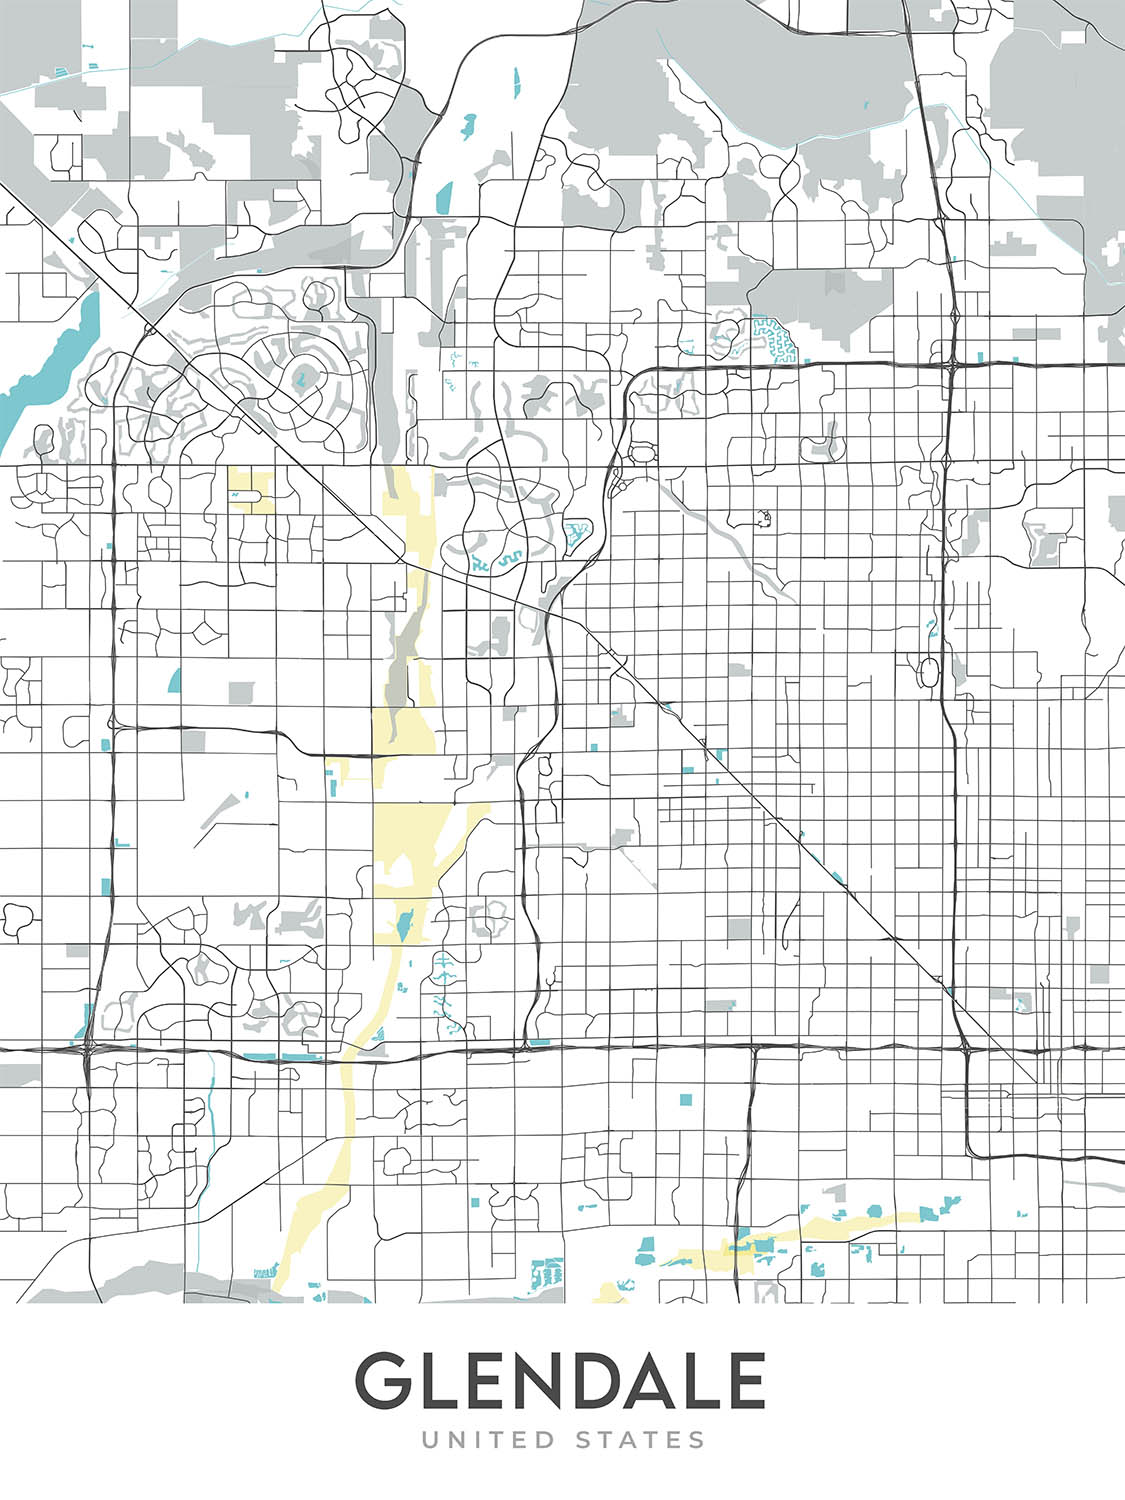 Modern City Map of Glendale, AZ: Arrowhead Ranch, State Farm Stadium, Westgate, Sports and Entertainment District, State Route 101